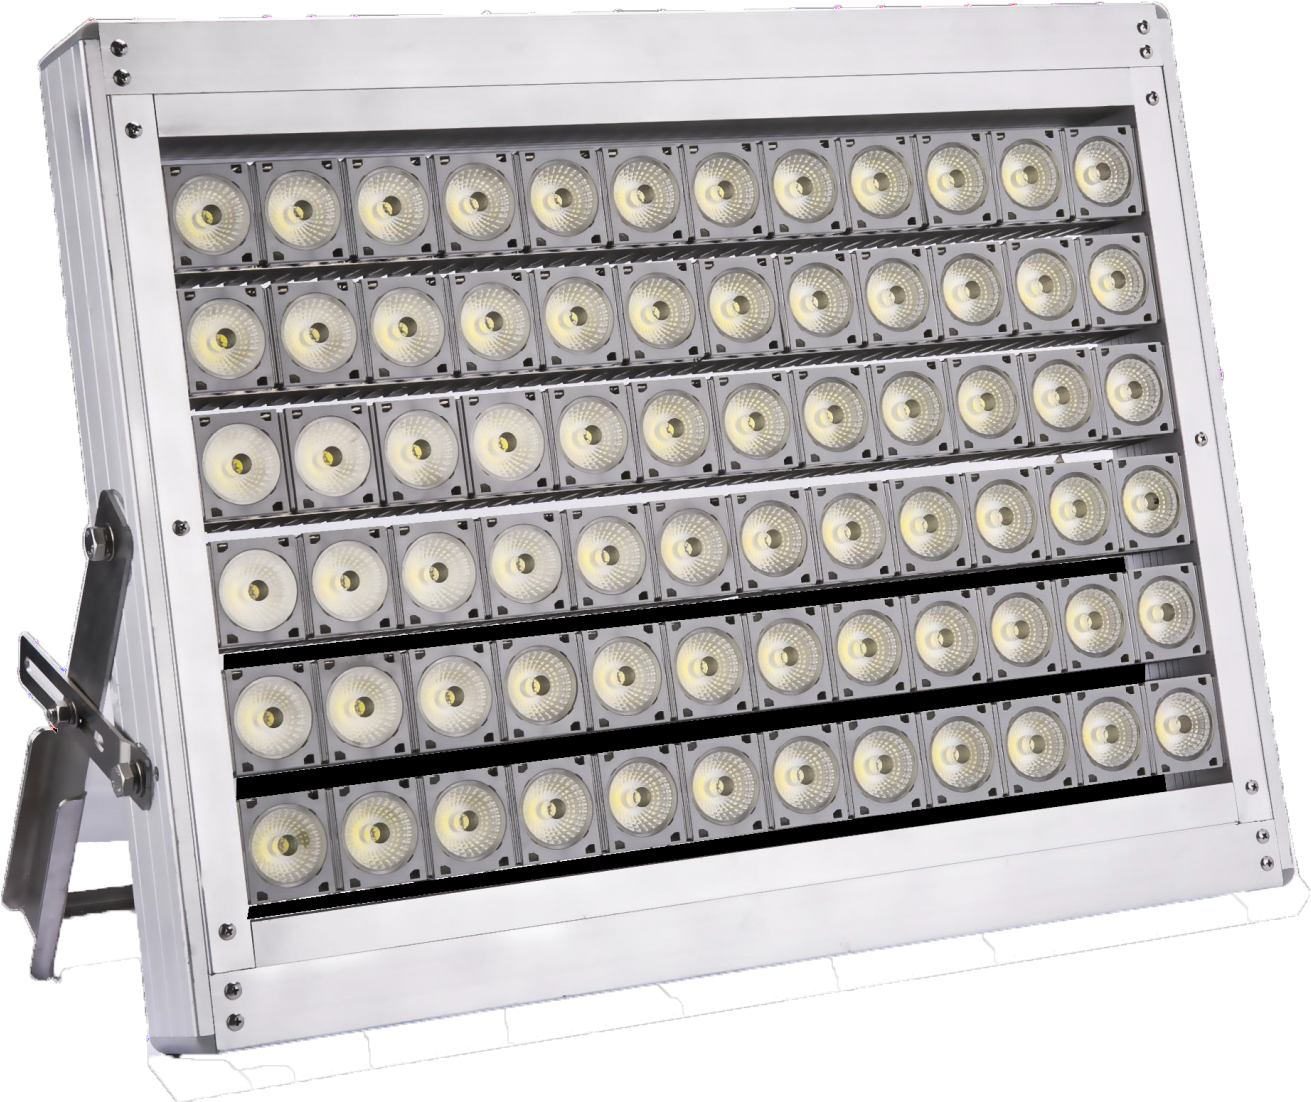 A White Rectangular Light Box With Many Lights